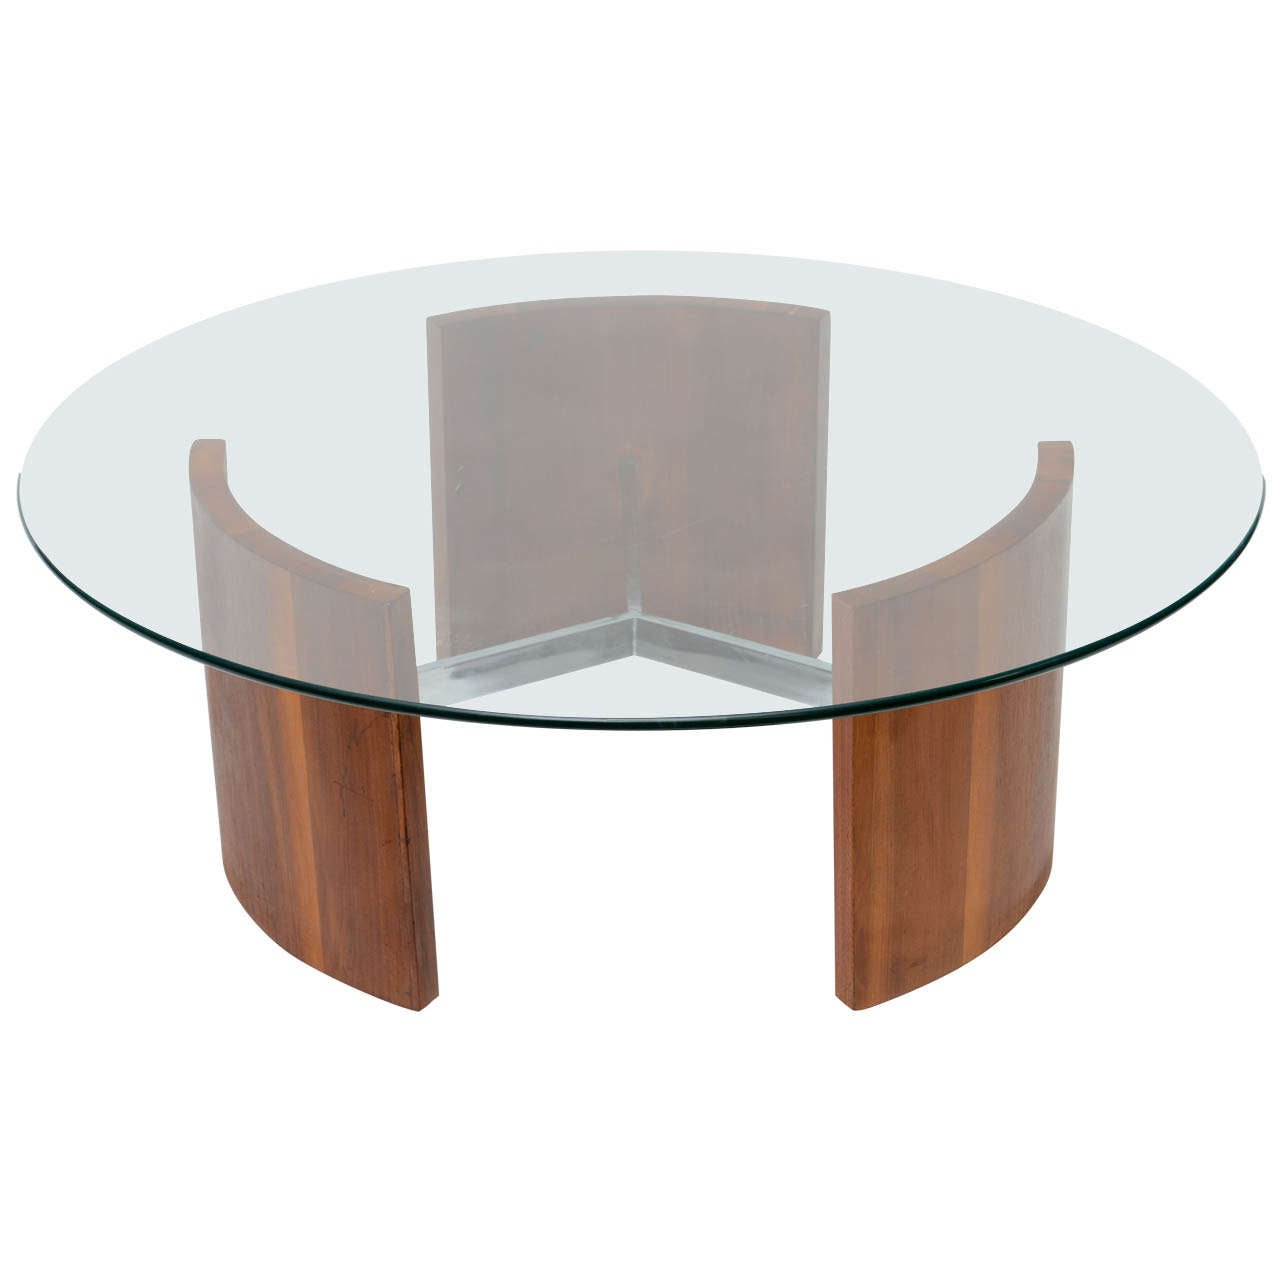 Radial Coffee Table in Walnut and Steel